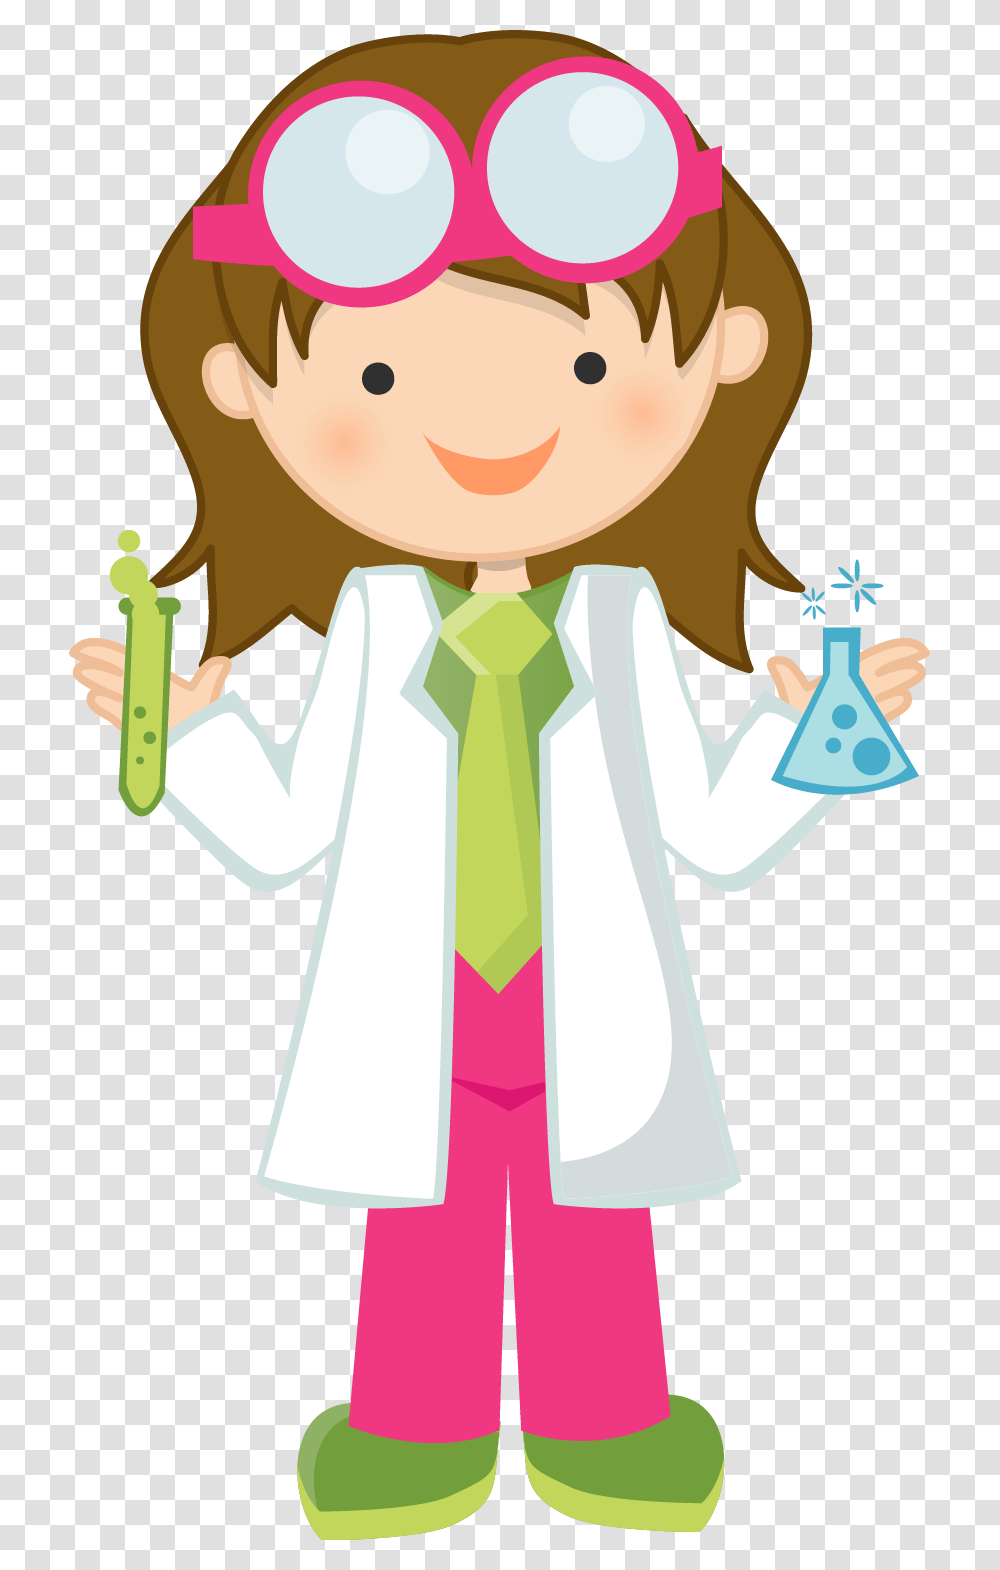 Past Events, Toy, Scientist, Doctor Transparent Png